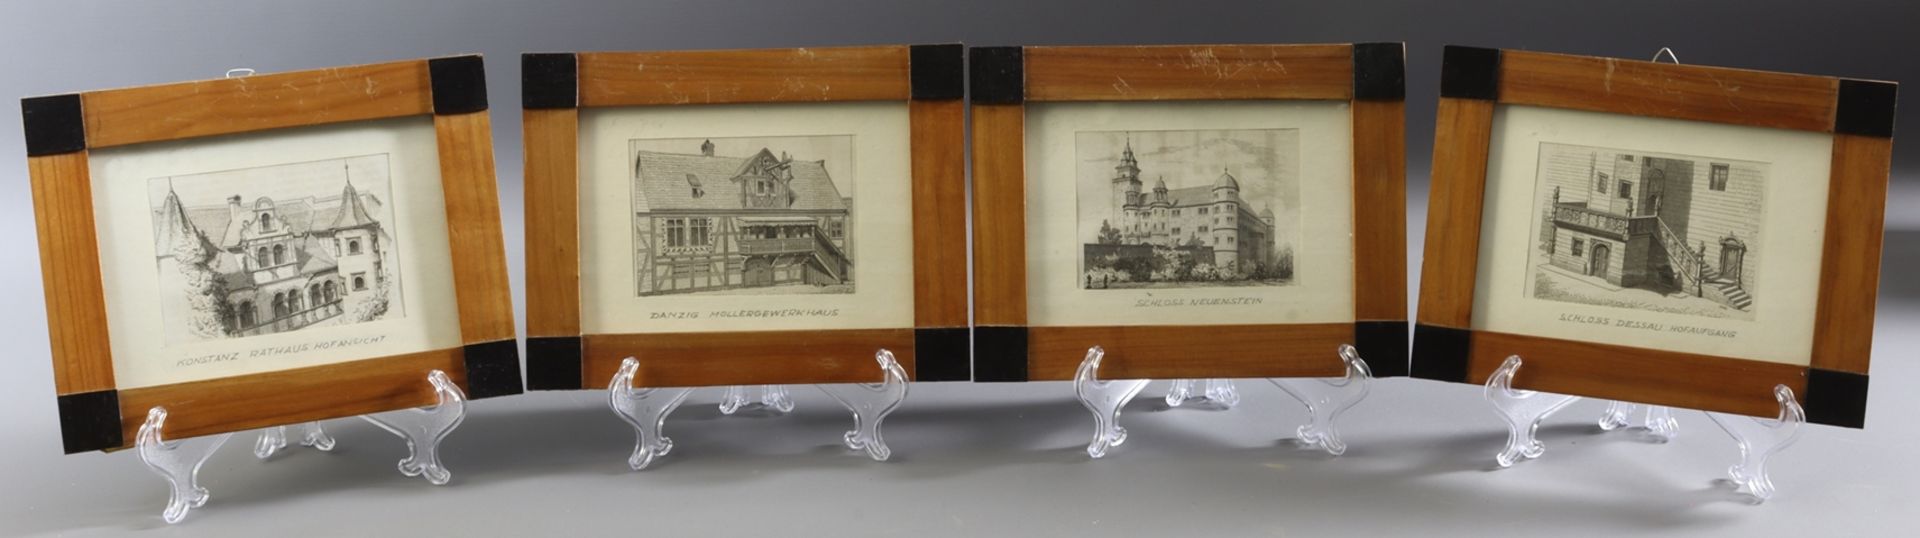 Four steel engravings, different views of the town 20th century.  